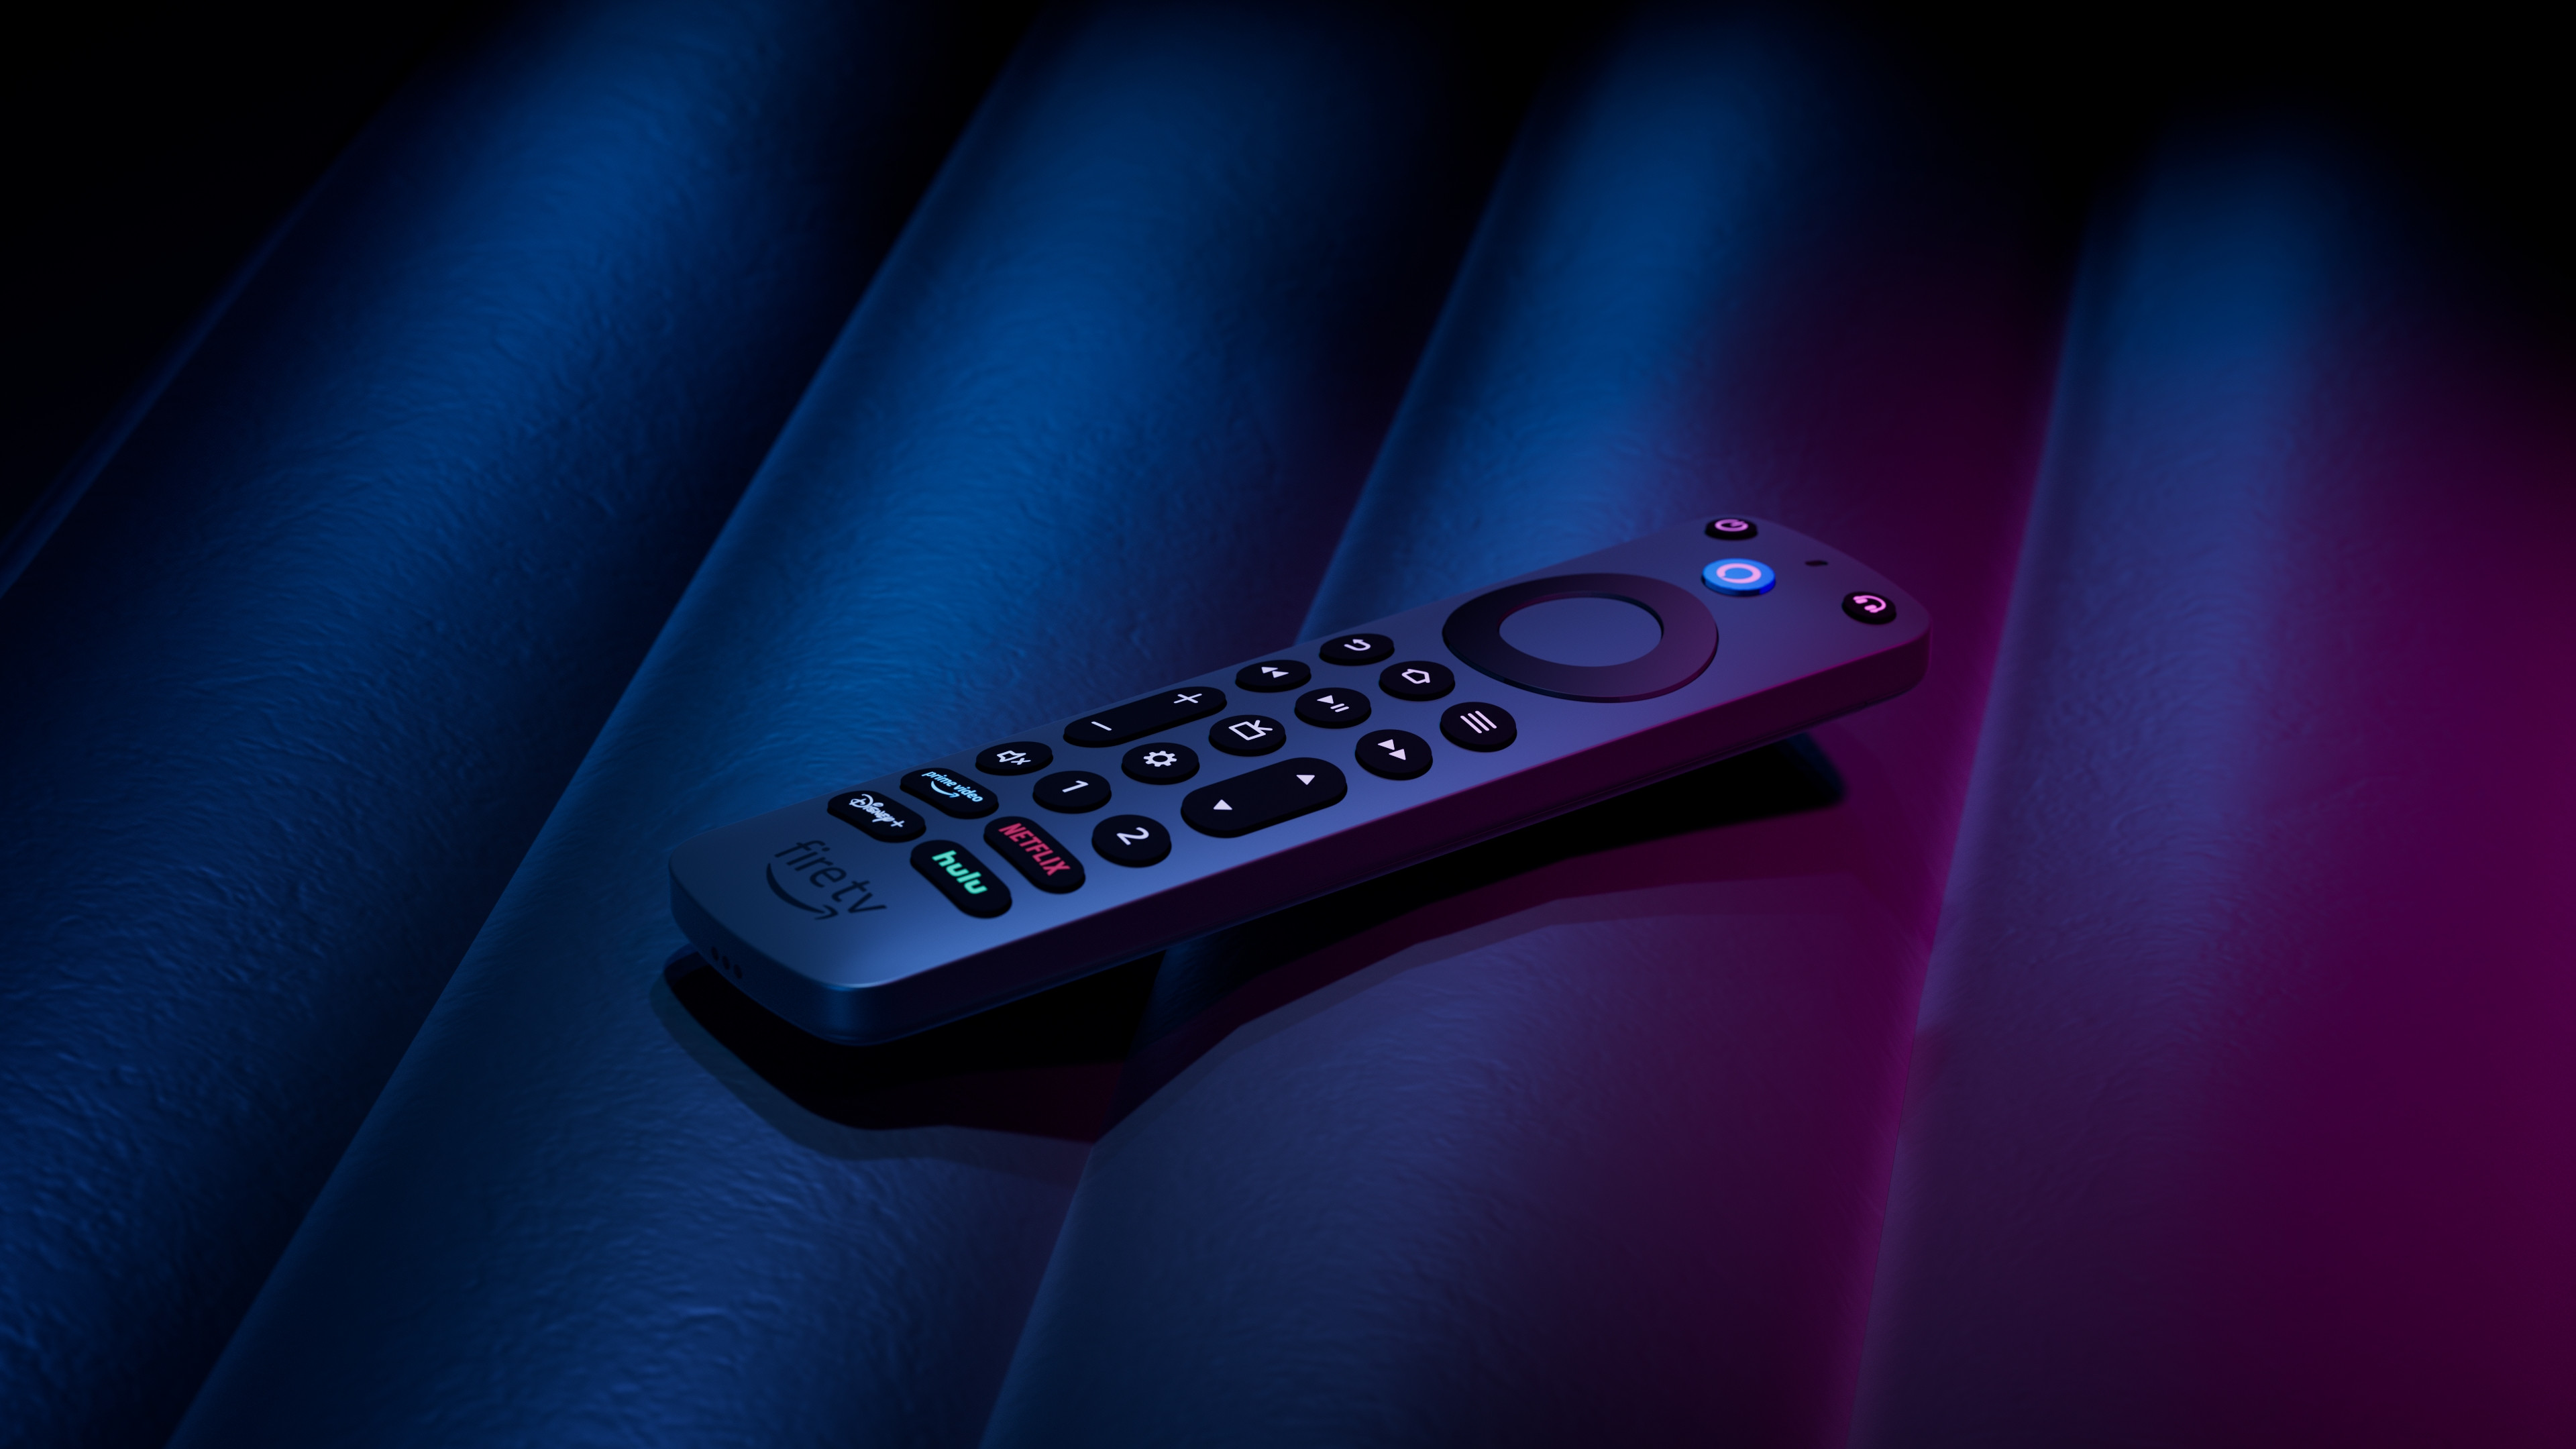 Early stages of a lifestyle render for the Amazon Fire TV Cube remote. I recreated the materials from Cinema4D to add to Maya for rendering. This image later evolved a bit but for the most part the theme stayed the same